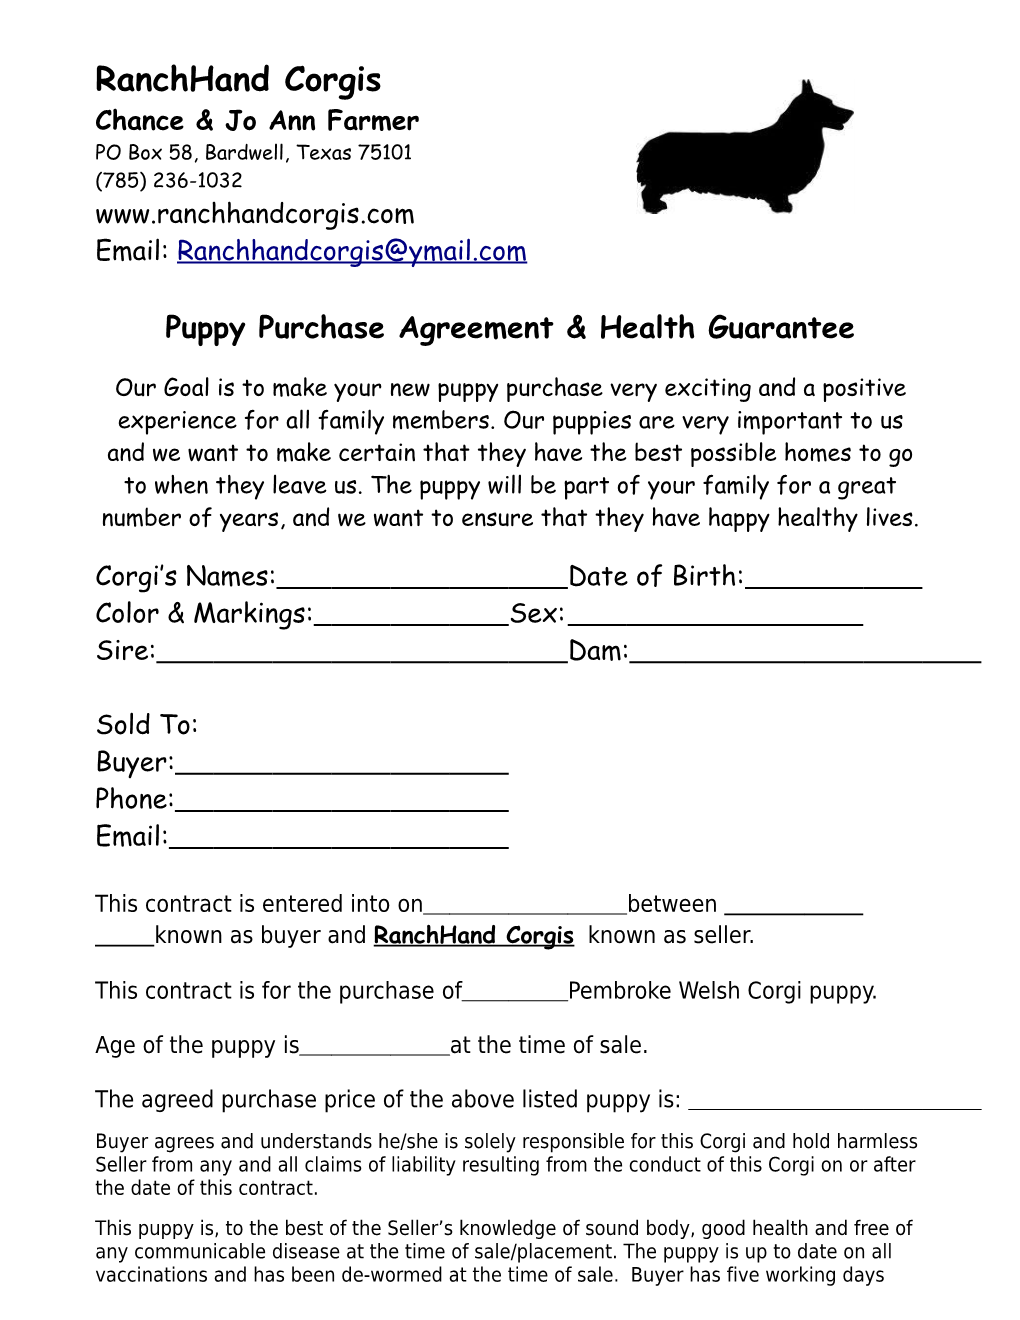 Puppy Purchase Agreement & Health Guarantee